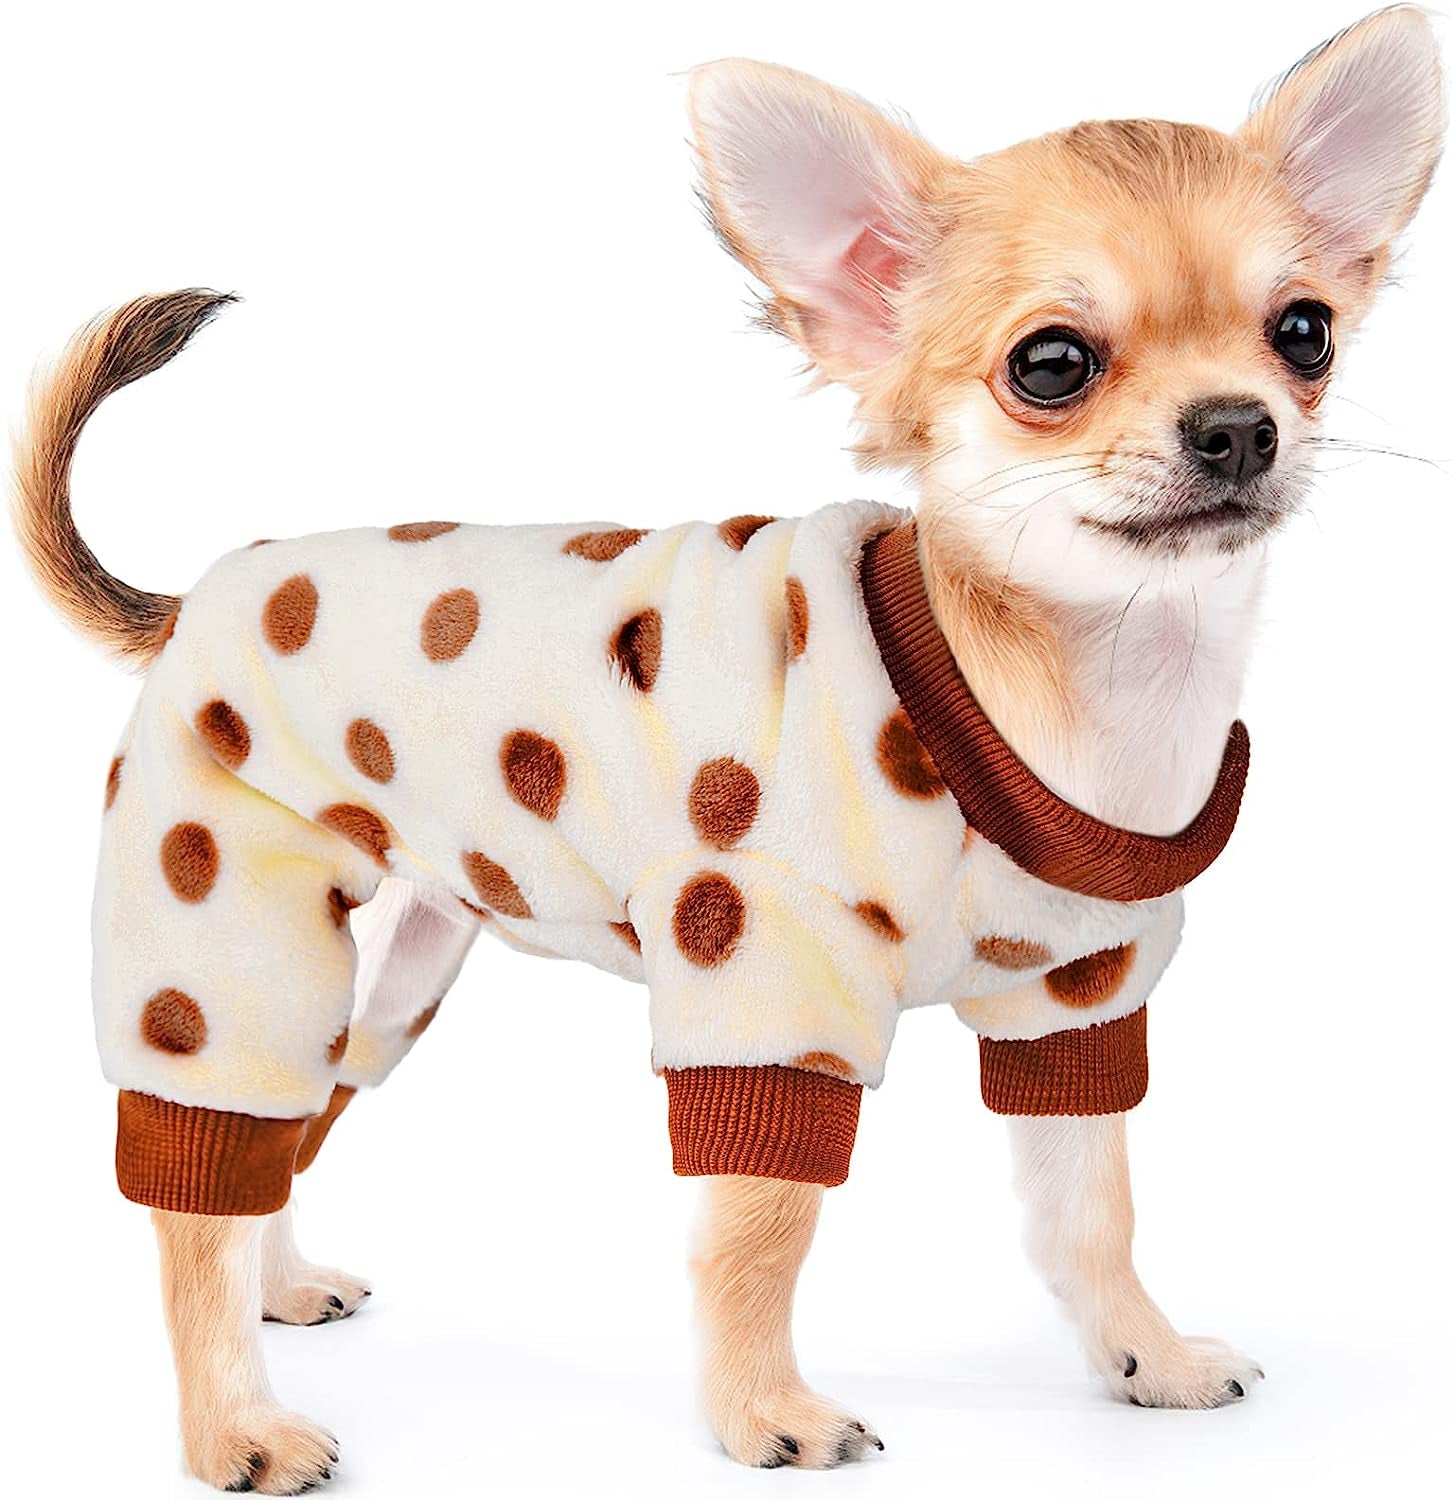  4 Pieces Fall Dog Shirt for Small Dogs, Tiny Dog Clothes  Outfit, Extra Small Dog Clothes, Yorkie Teacup Chihuahua Male Clothes,  Summer Pet Cat Clothing (X-Small) Brown : Pet Supplies